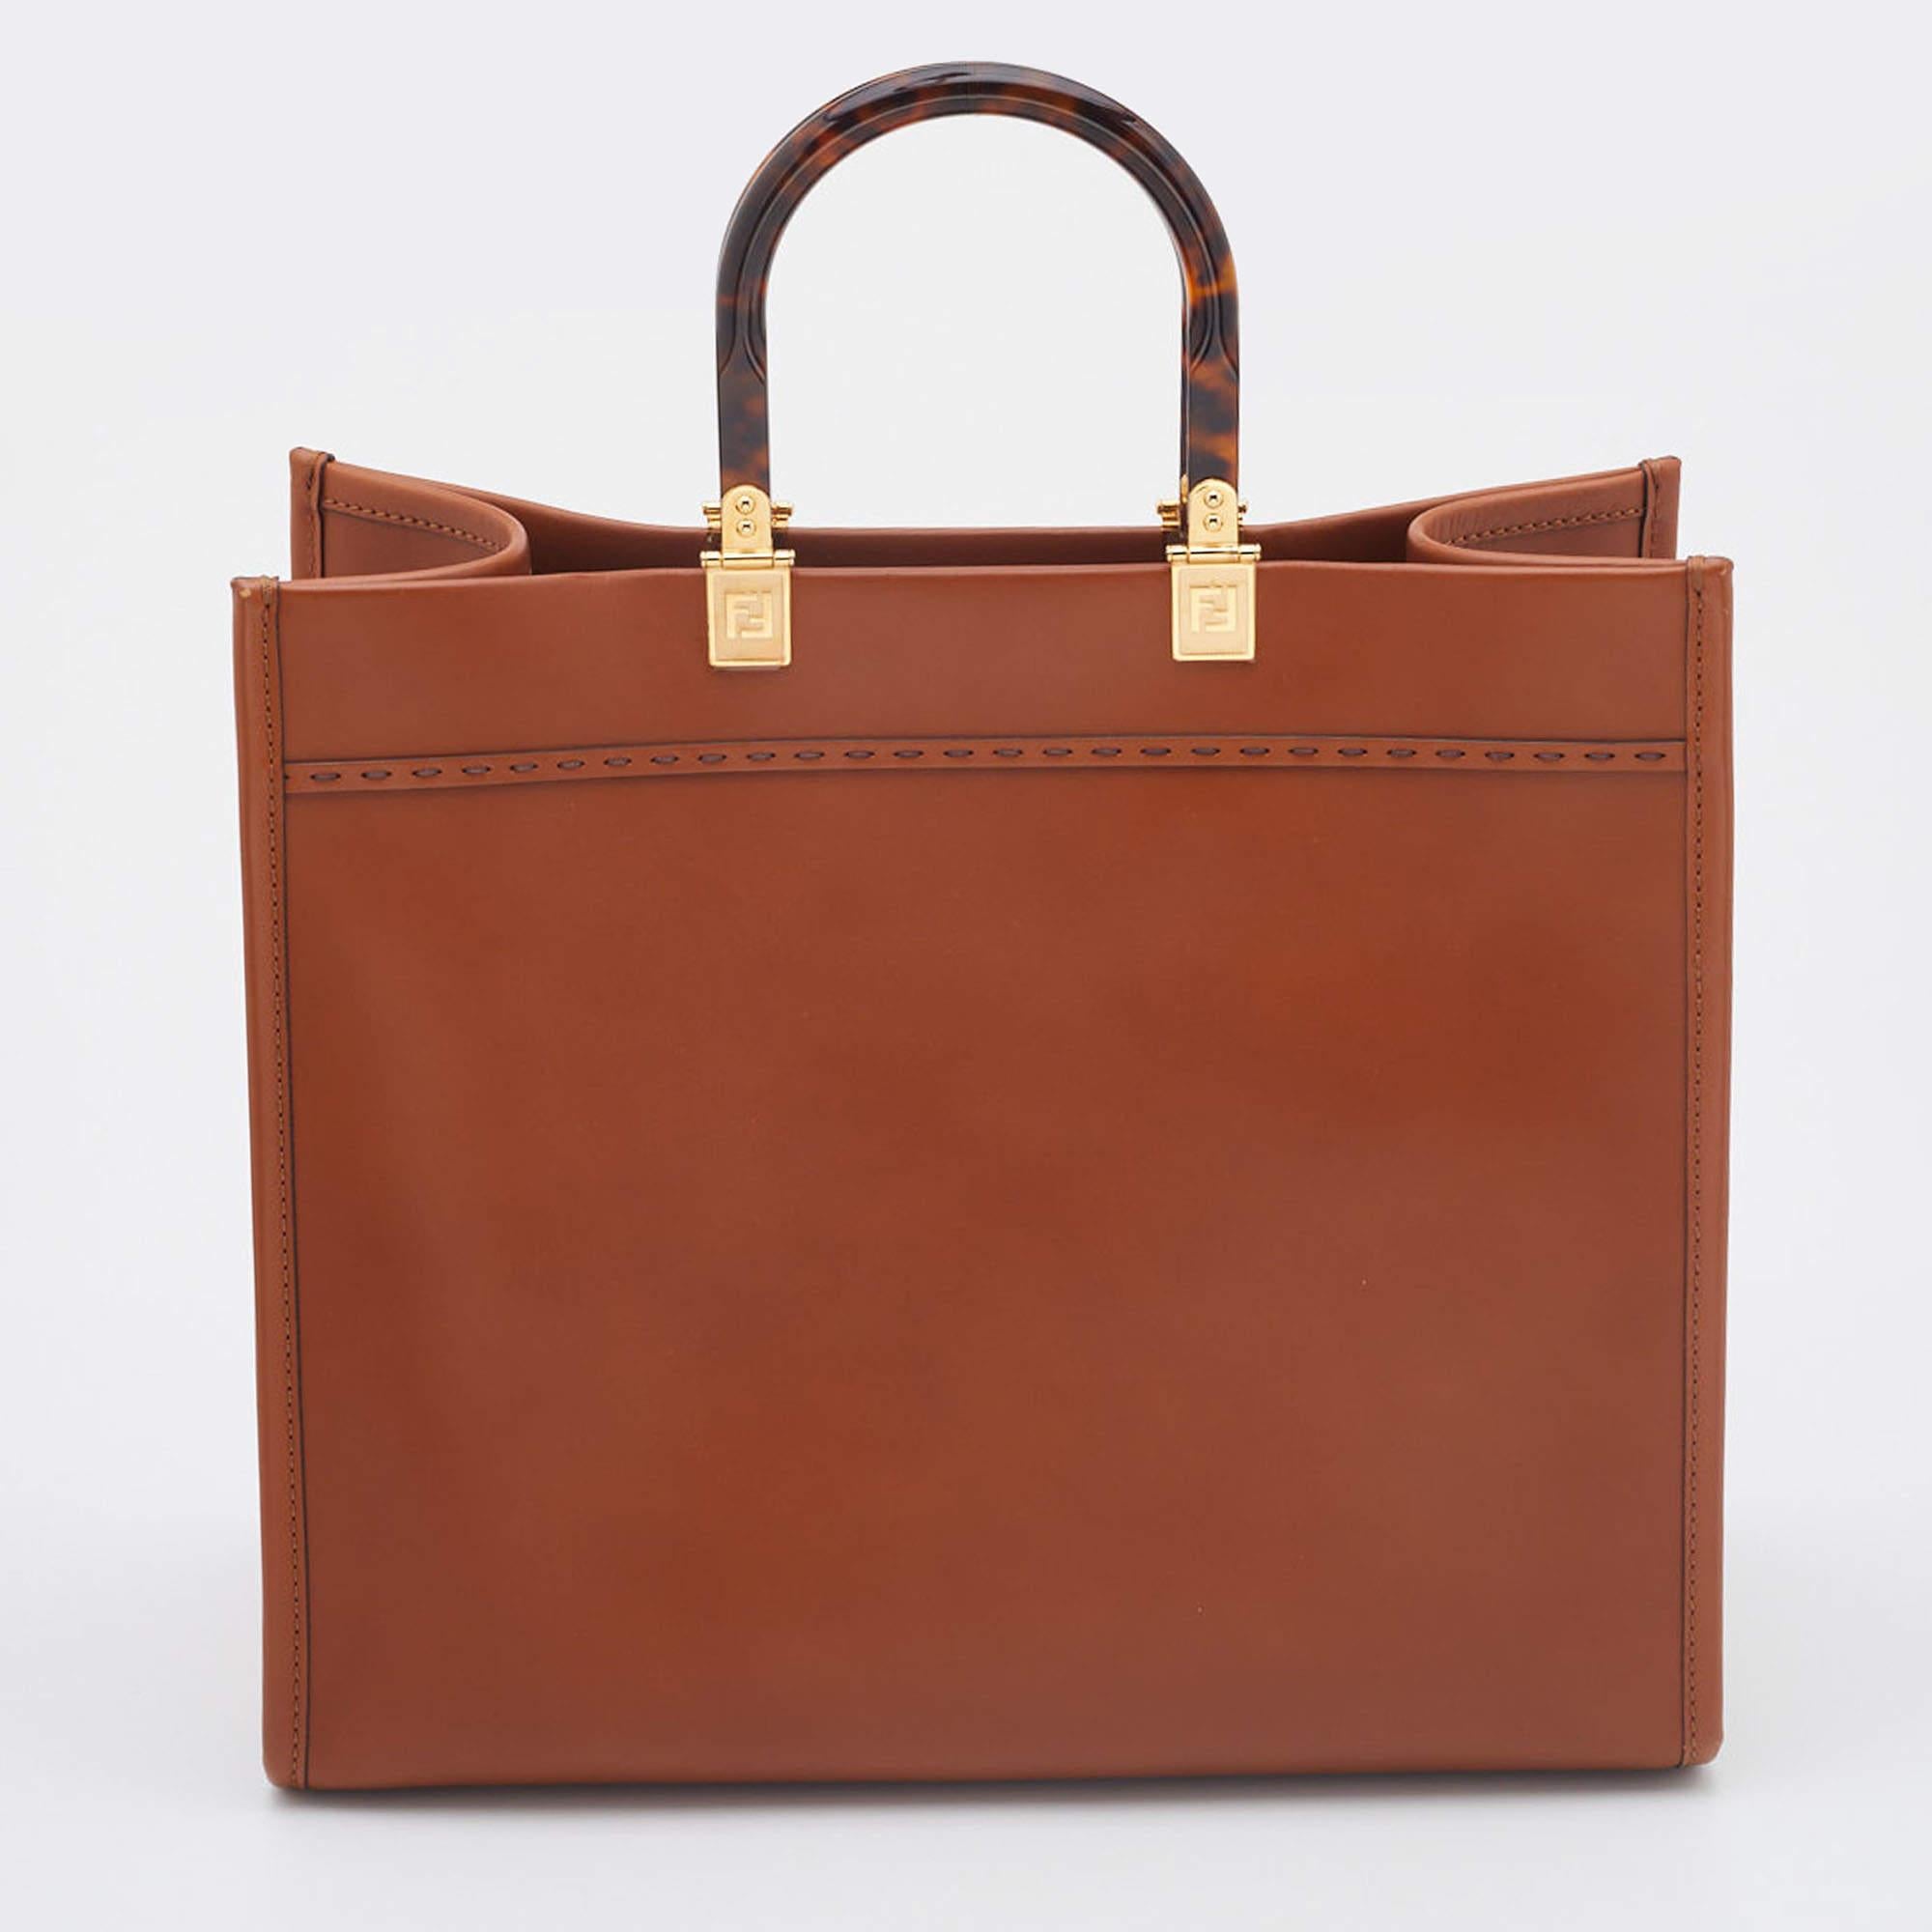 Know to create stylish, sophisticated, and timeless designs, Fendi is a brand worth investing in. The bags that come from this label's atelier are exquisite. This Sunshine tote bag is no different. It has been made from quality materials and comes